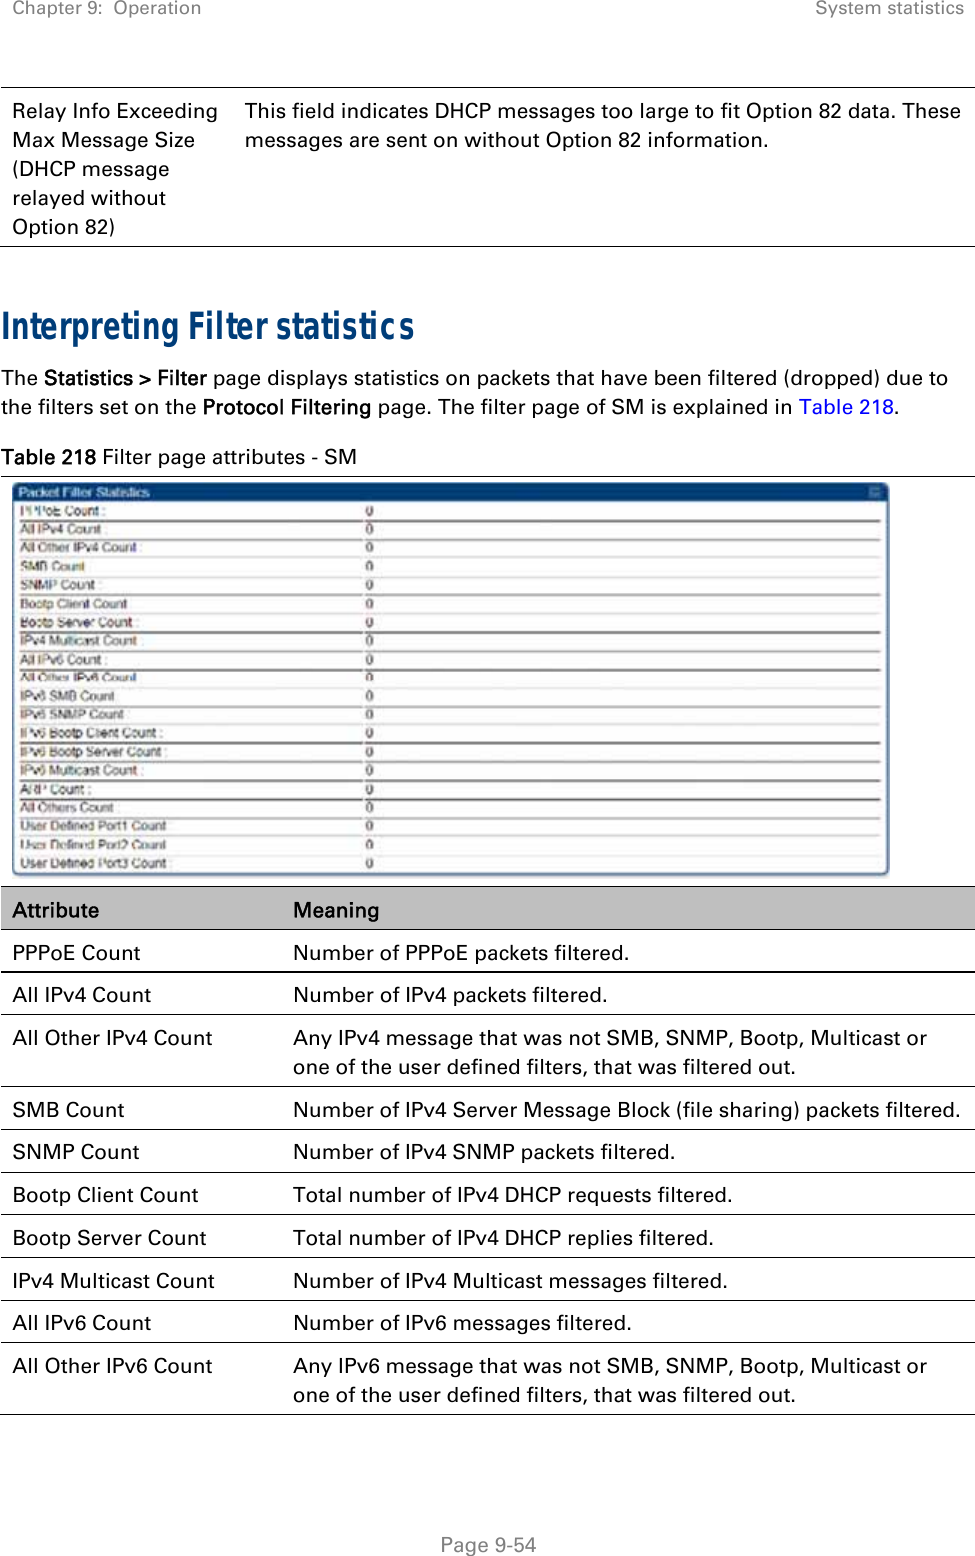 Chapter 9:  Operation  System statistics   Page 9-54 Relay Info Exceeding Max Message Size (DHCP message relayed without Option 82) This field indicates DHCP messages too large to fit Option 82 data. These messages are sent on without Option 82 information.  Interpreting Filter statistics The Statistics &gt; Filter page displays statistics on packets that have been filtered (dropped) due to the filters set on the Protocol Filtering page. The filter page of SM is explained in Table 218. Table 218 Filter page attributes - SM  Attribute  Meaning PPPoE Count  Number of PPPoE packets filtered.  All IPv4 Count  Number of IPv4 packets filtered. All Other IPv4 Count  Any IPv4 message that was not SMB, SNMP, Bootp, Multicast or one of the user defined filters, that was filtered out. SMB Count  Number of IPv4 Server Message Block (file sharing) packets filtered. SNMP Count  Number of IPv4 SNMP packets filtered. Bootp Client Count  Total number of IPv4 DHCP requests filtered. Bootp Server Count  Total number of IPv4 DHCP replies filtered. IPv4 Multicast Count  Number of IPv4 Multicast messages filtered. All IPv6 Count  Number of IPv6 messages filtered. All Other IPv6 Count  Any IPv6 message that was not SMB, SNMP, Bootp, Multicast or one of the user defined filters, that was filtered out. 